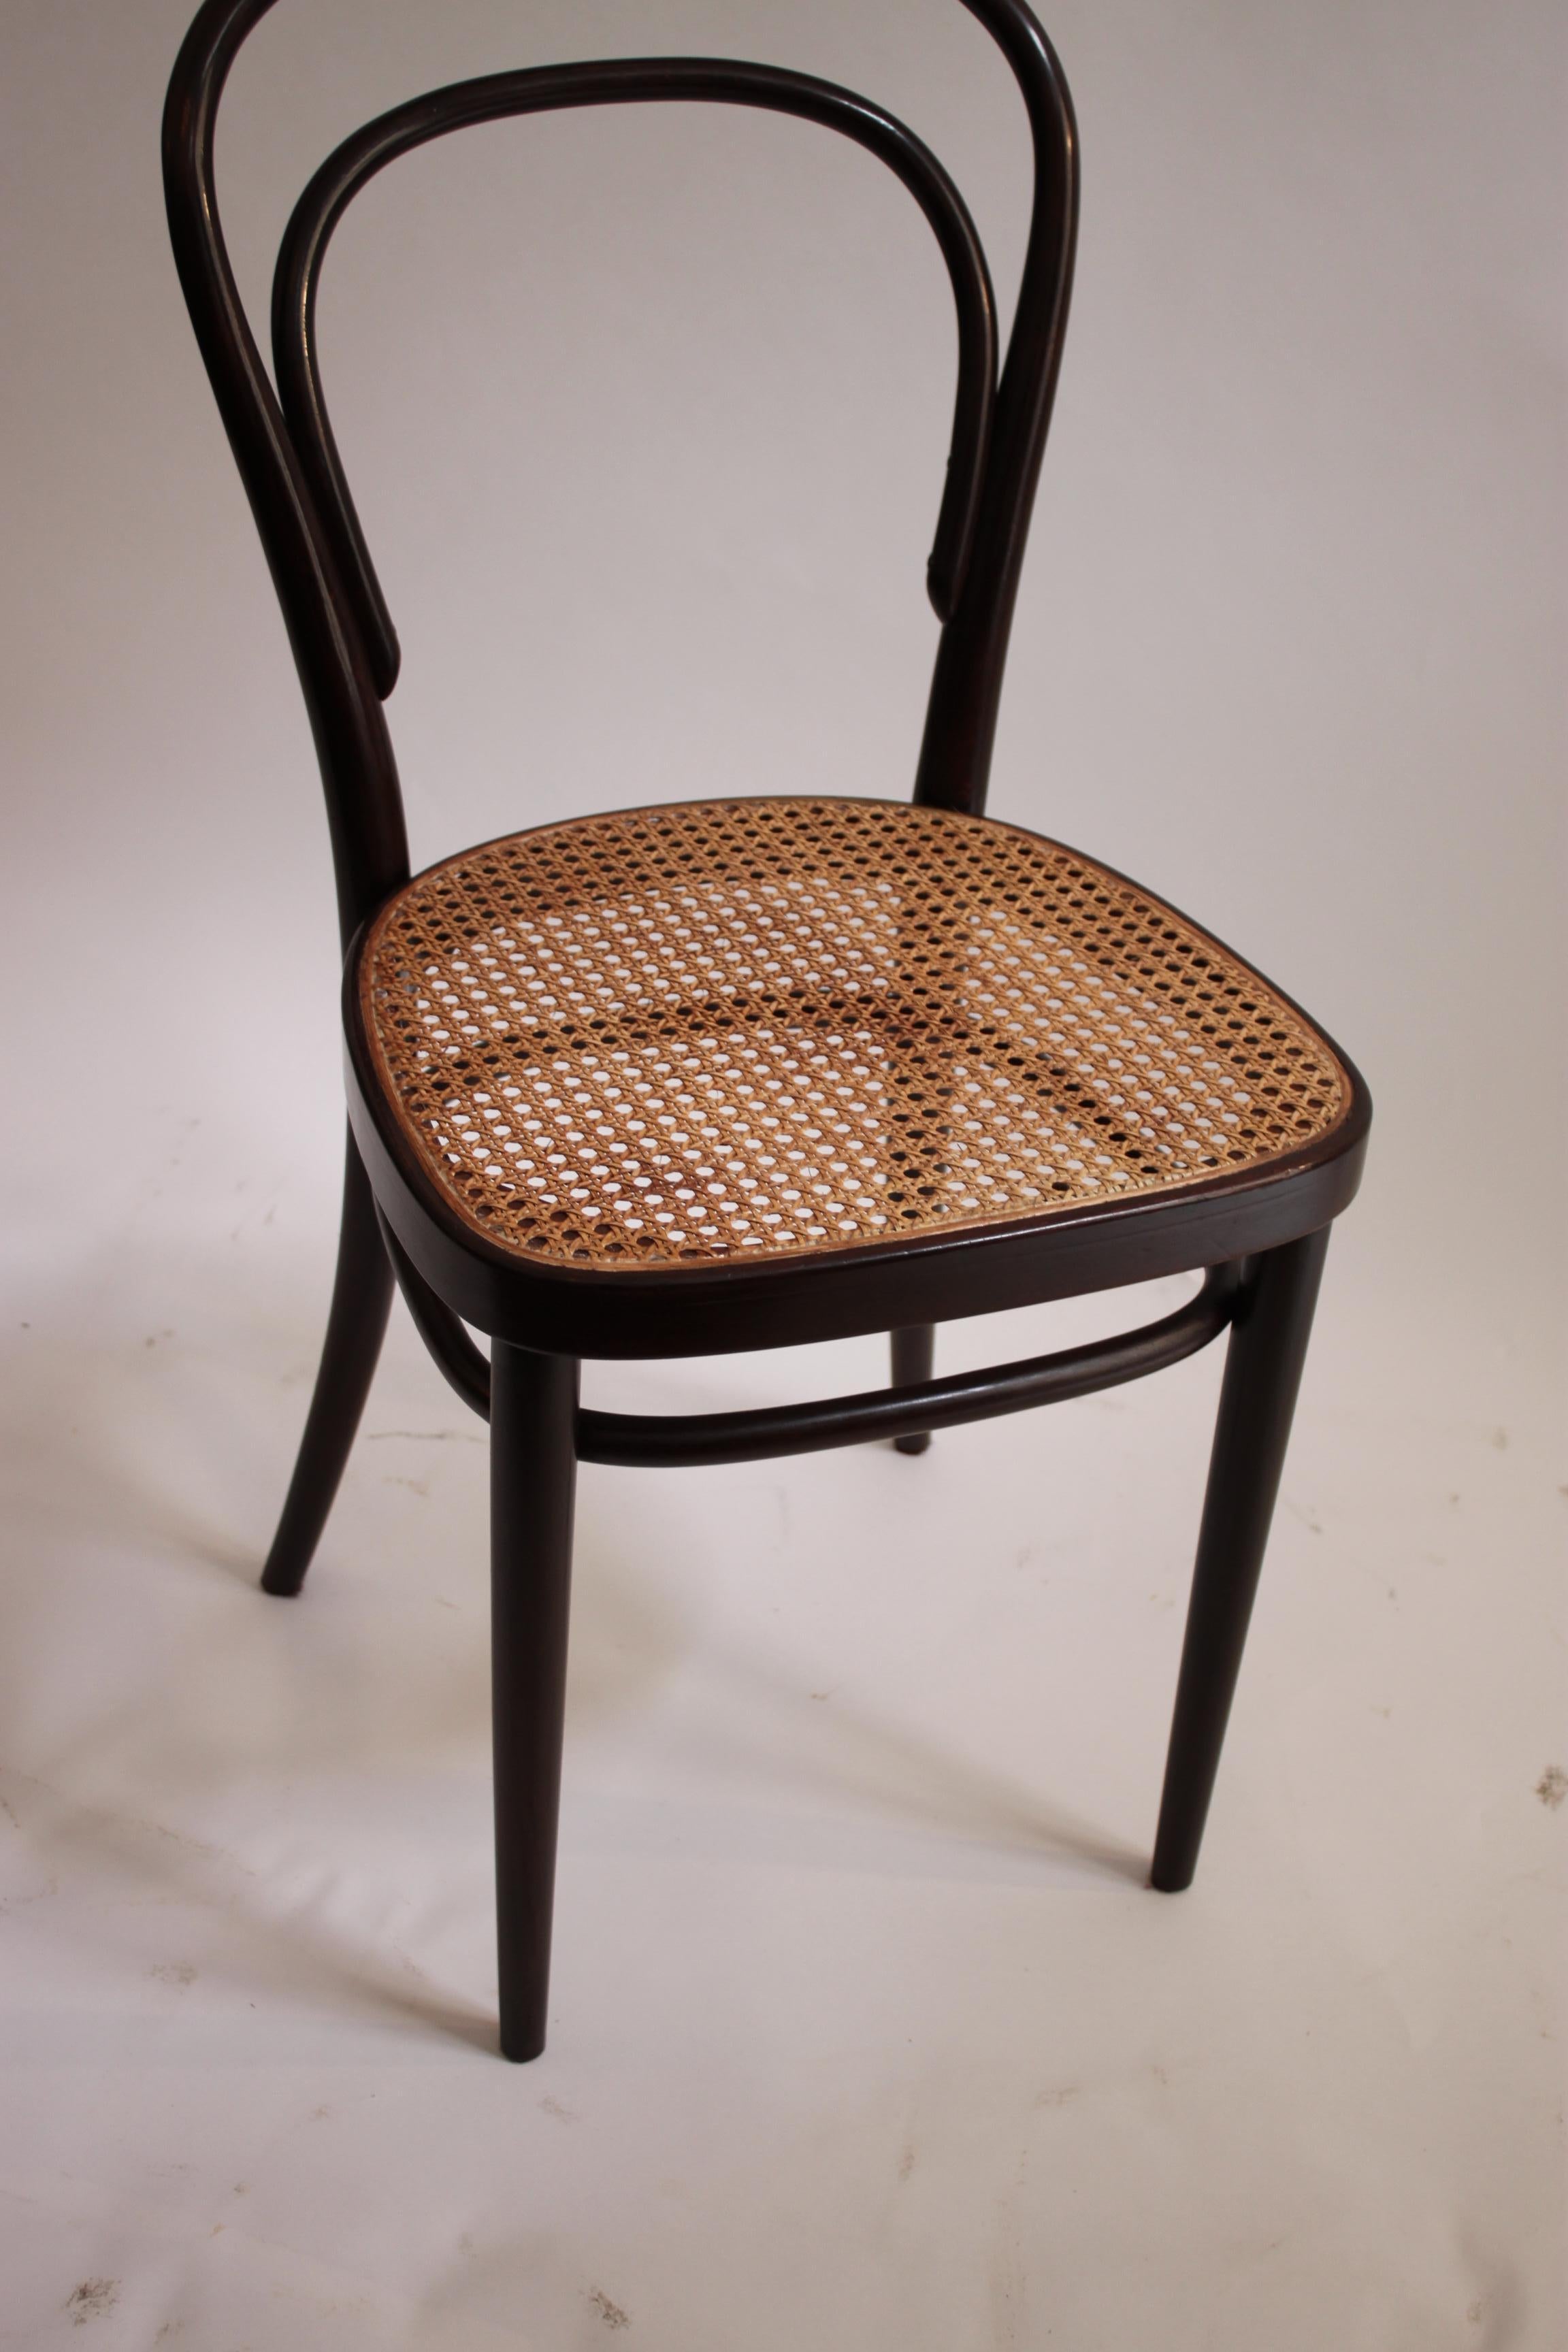 Thonet Bentwood Side Chair No. 14 In Good Condition For Sale In Vienna, Vienna